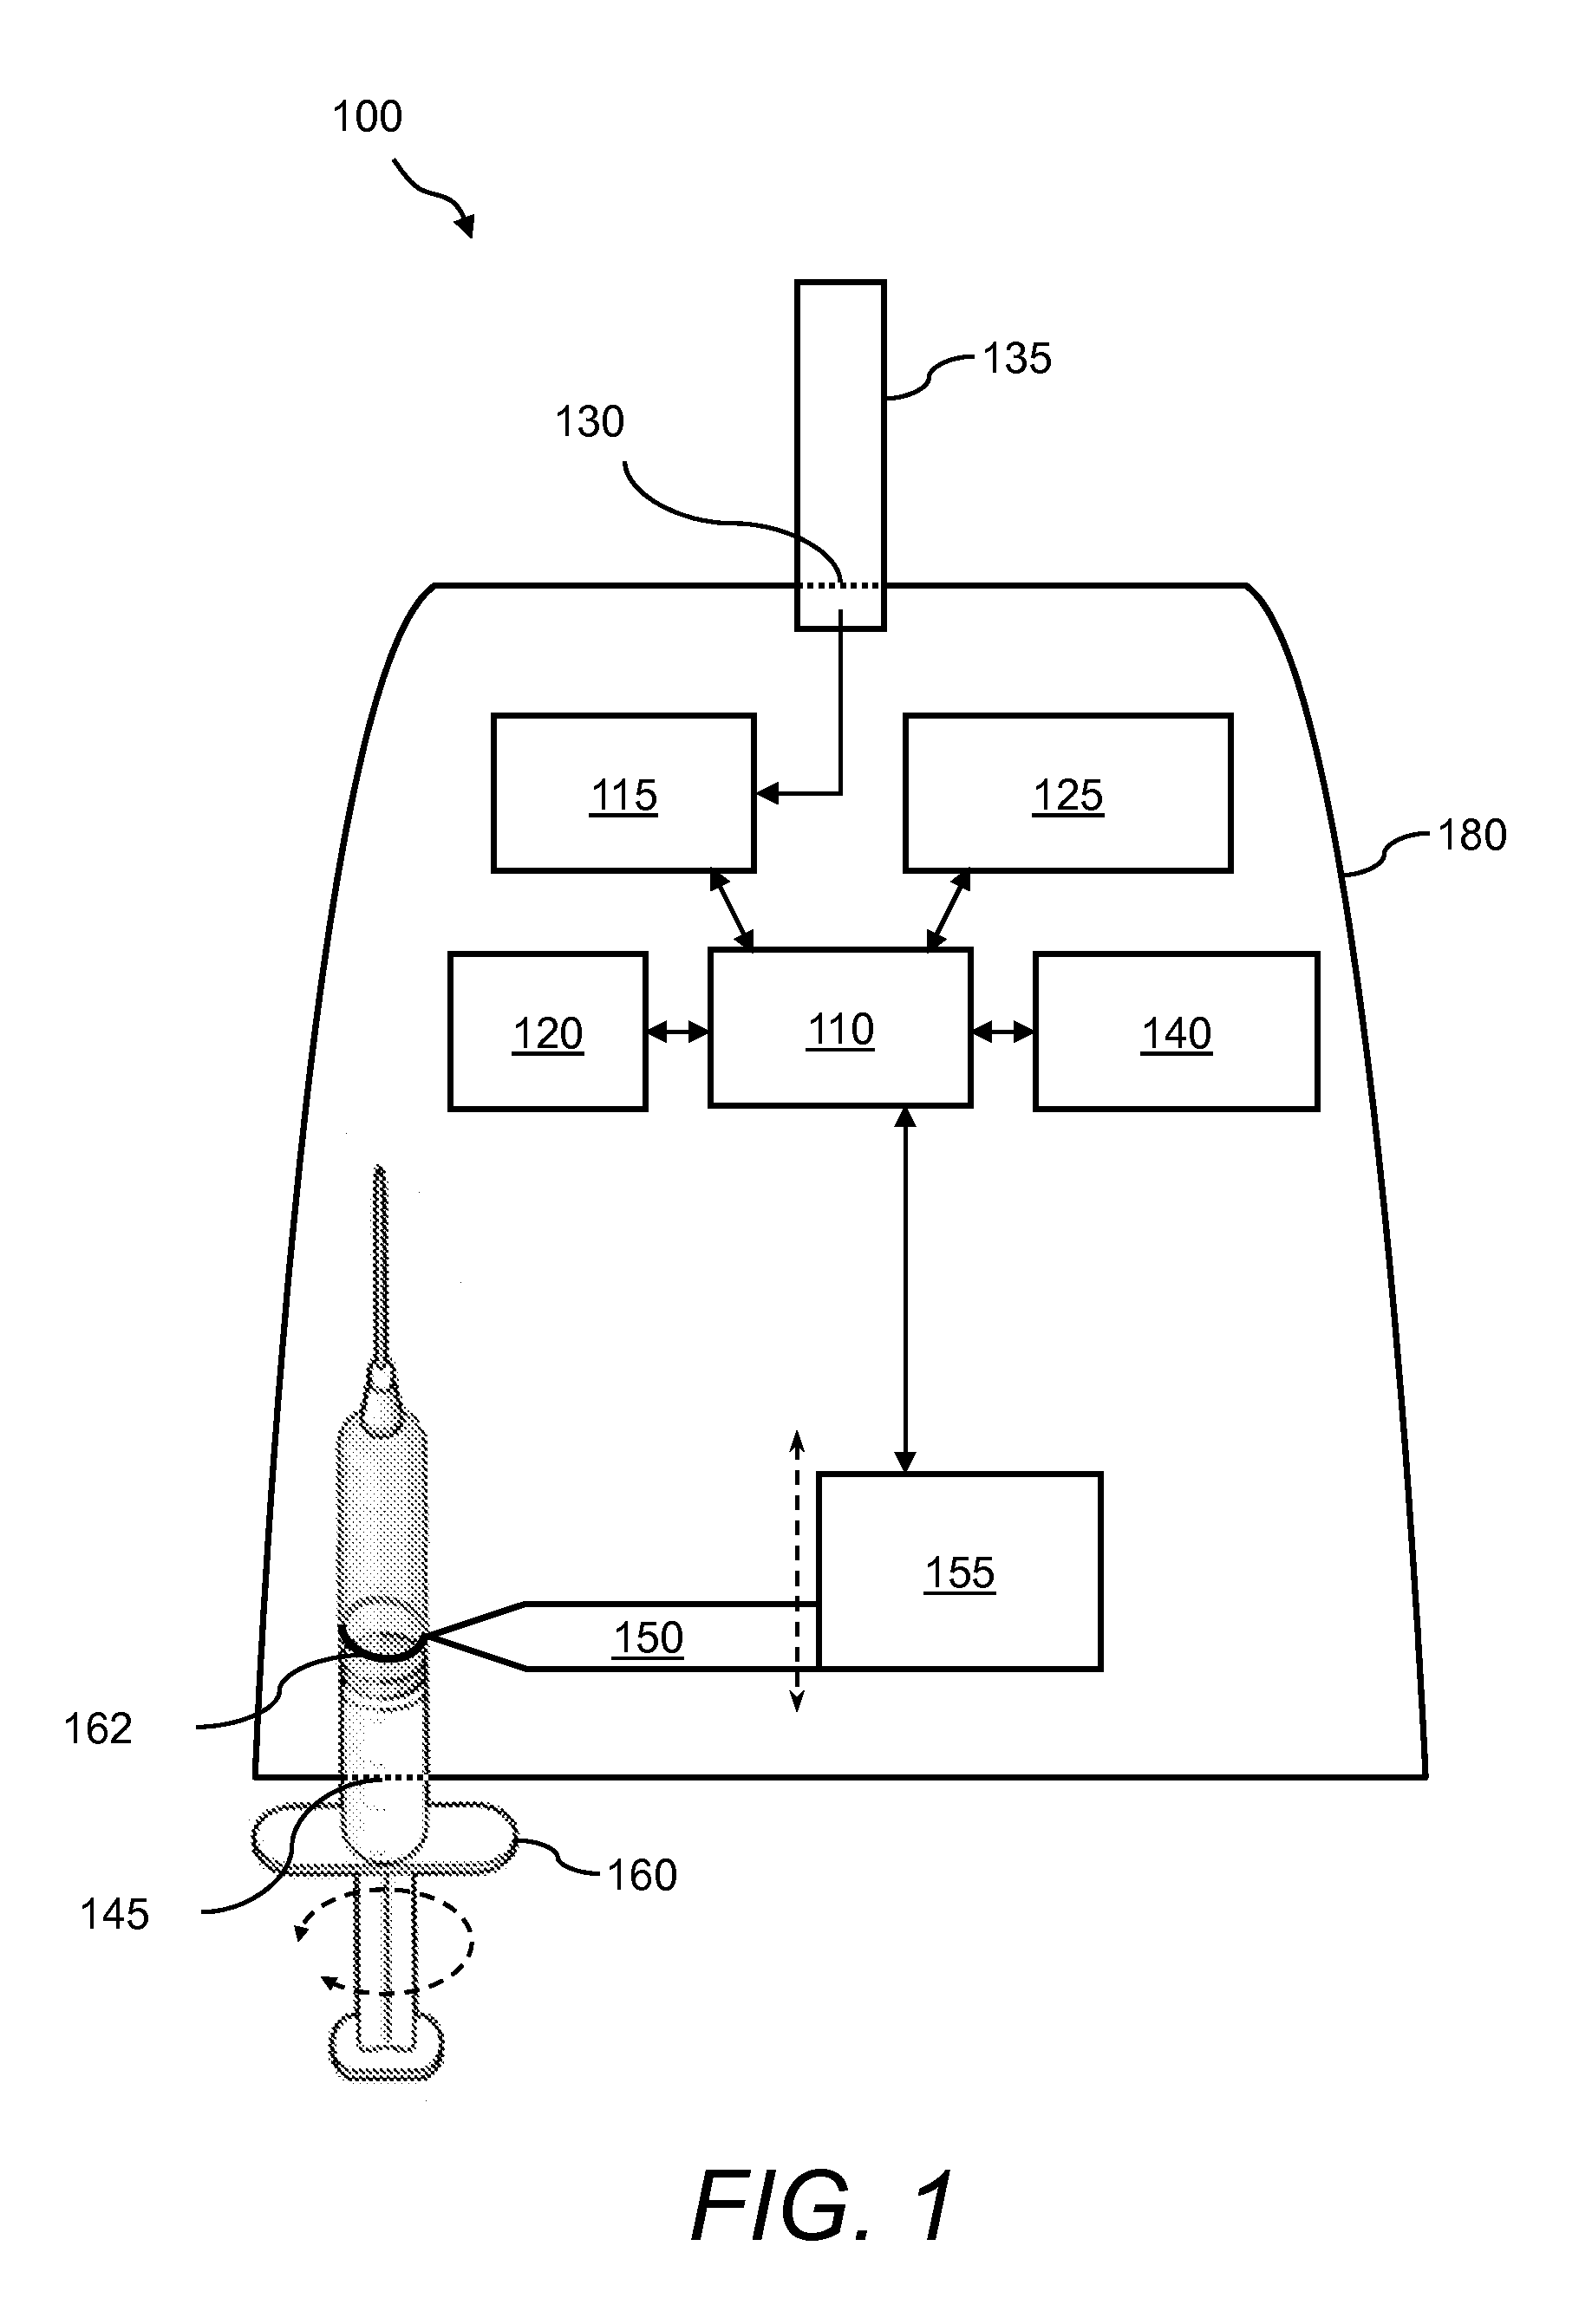 Multifunctional glucose monitoring system and method of using the same